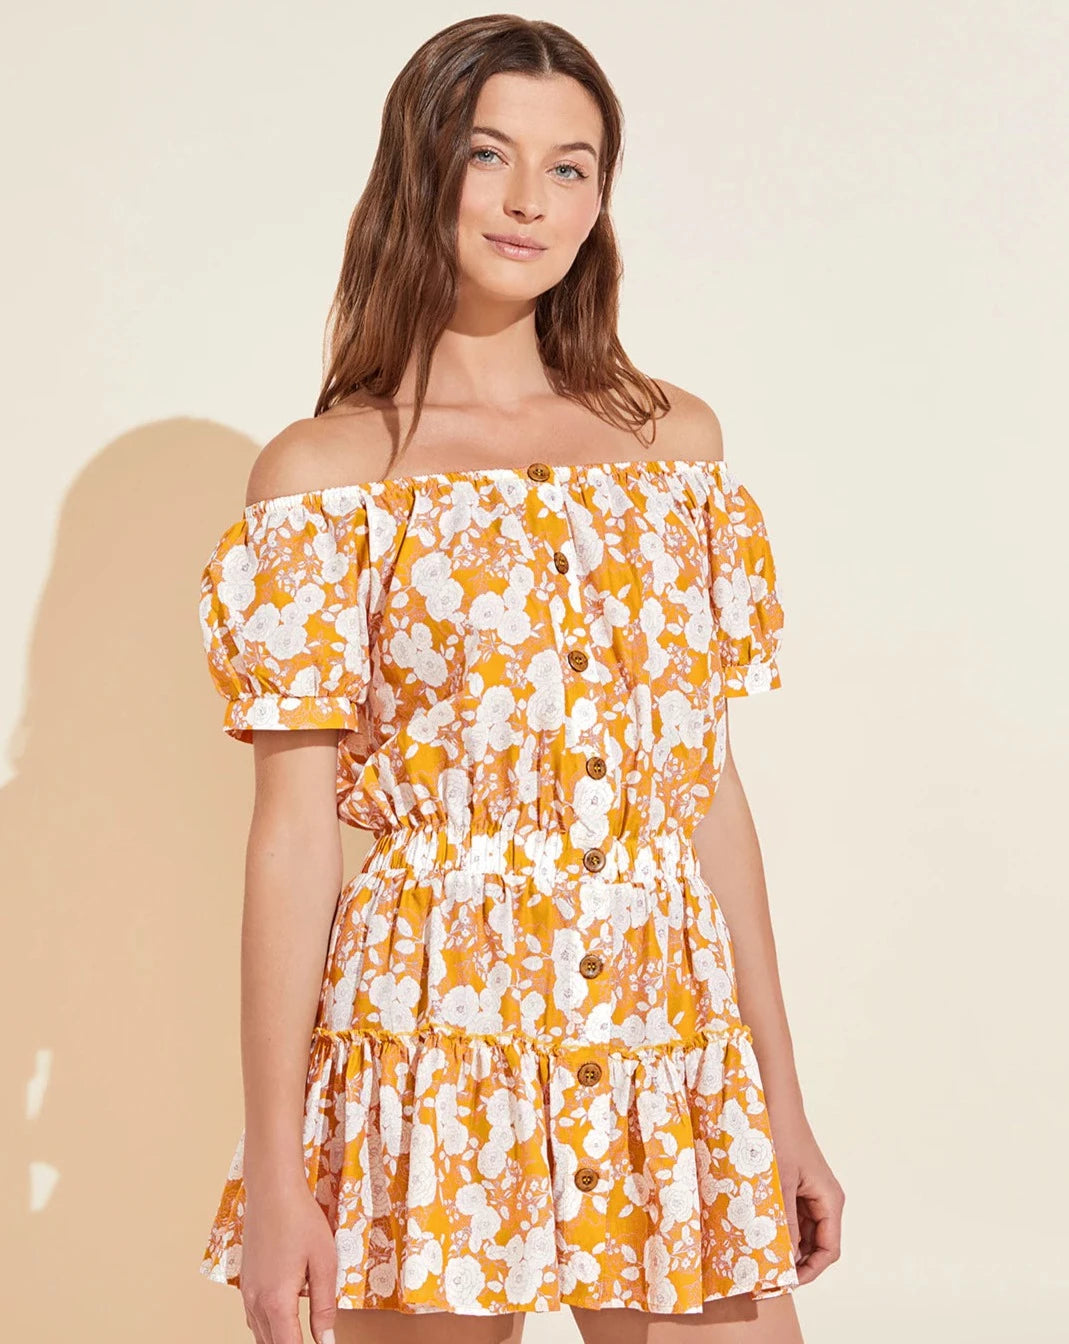 Retro Floral Cover-Up: Size S